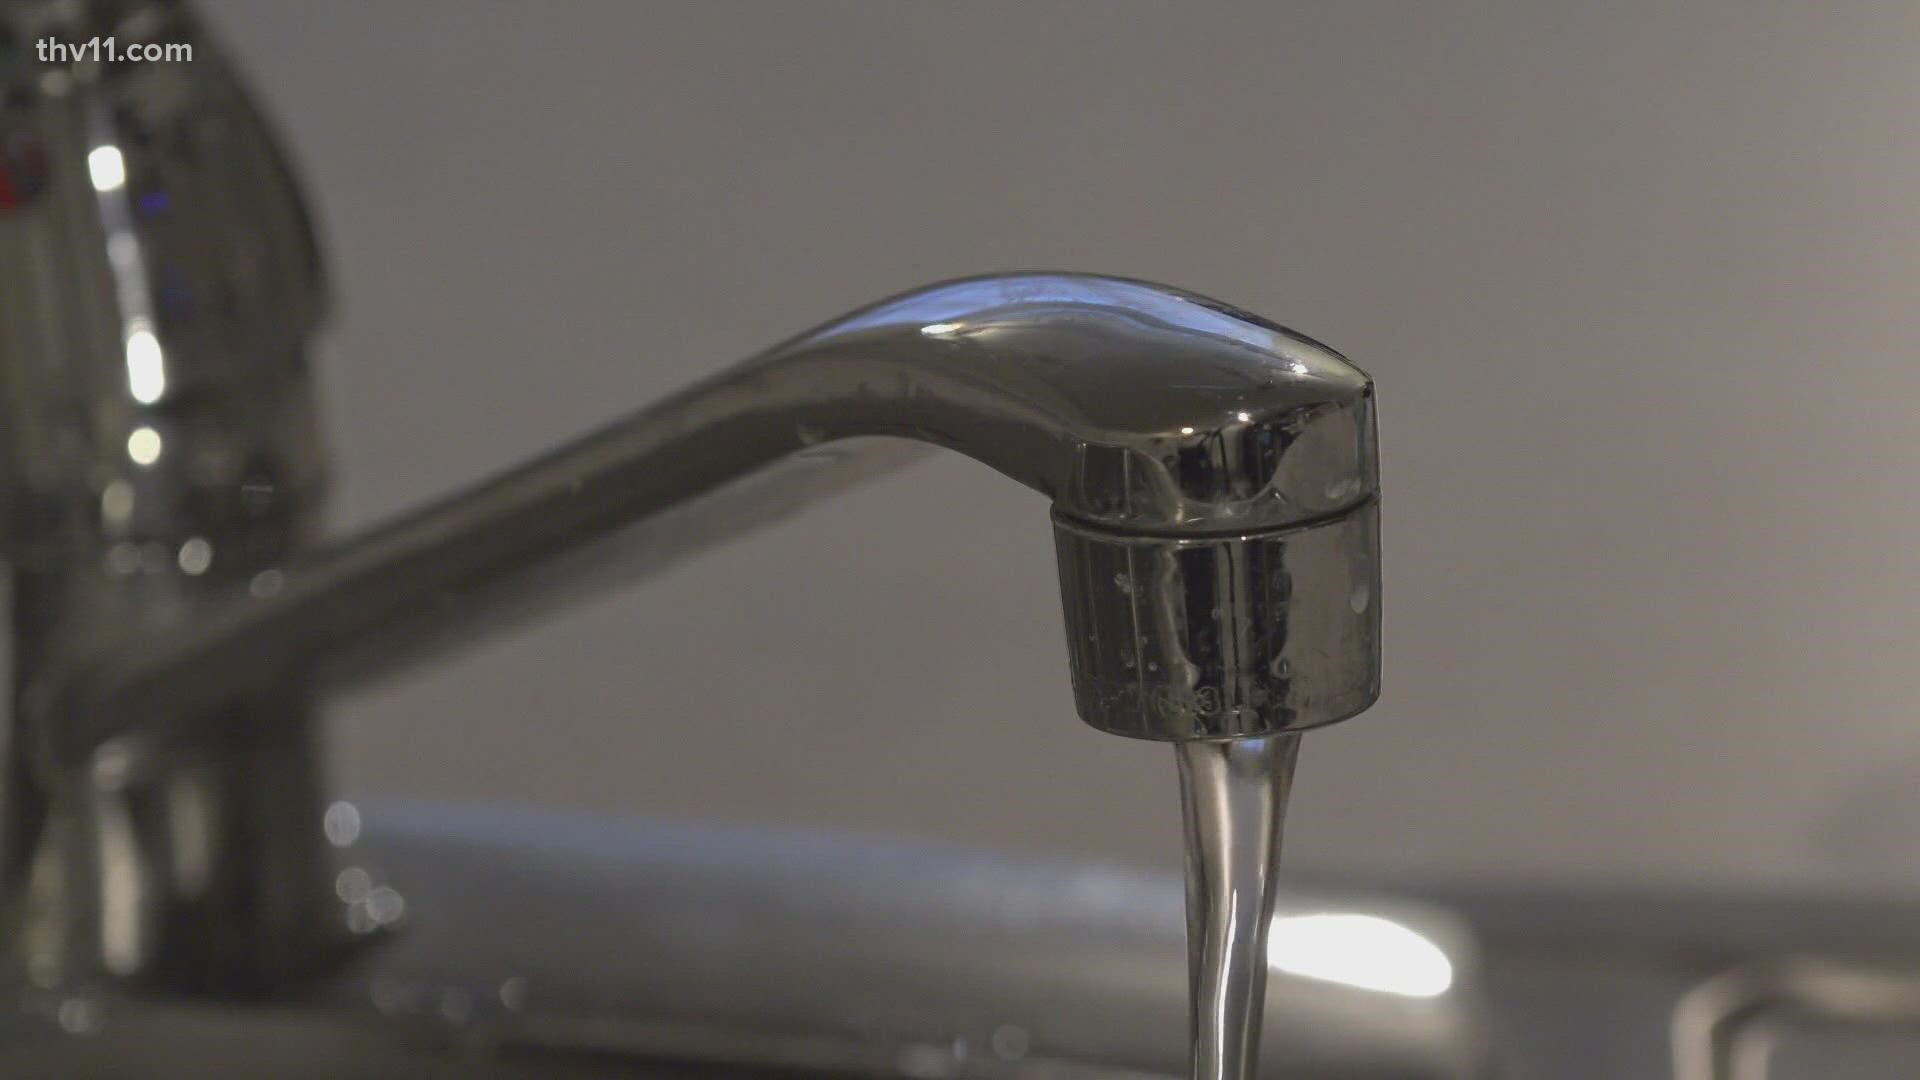 The Arkansas Department of Health has lifted the  Boil Water Notice that was in place for some customers in Bryant on April 21.